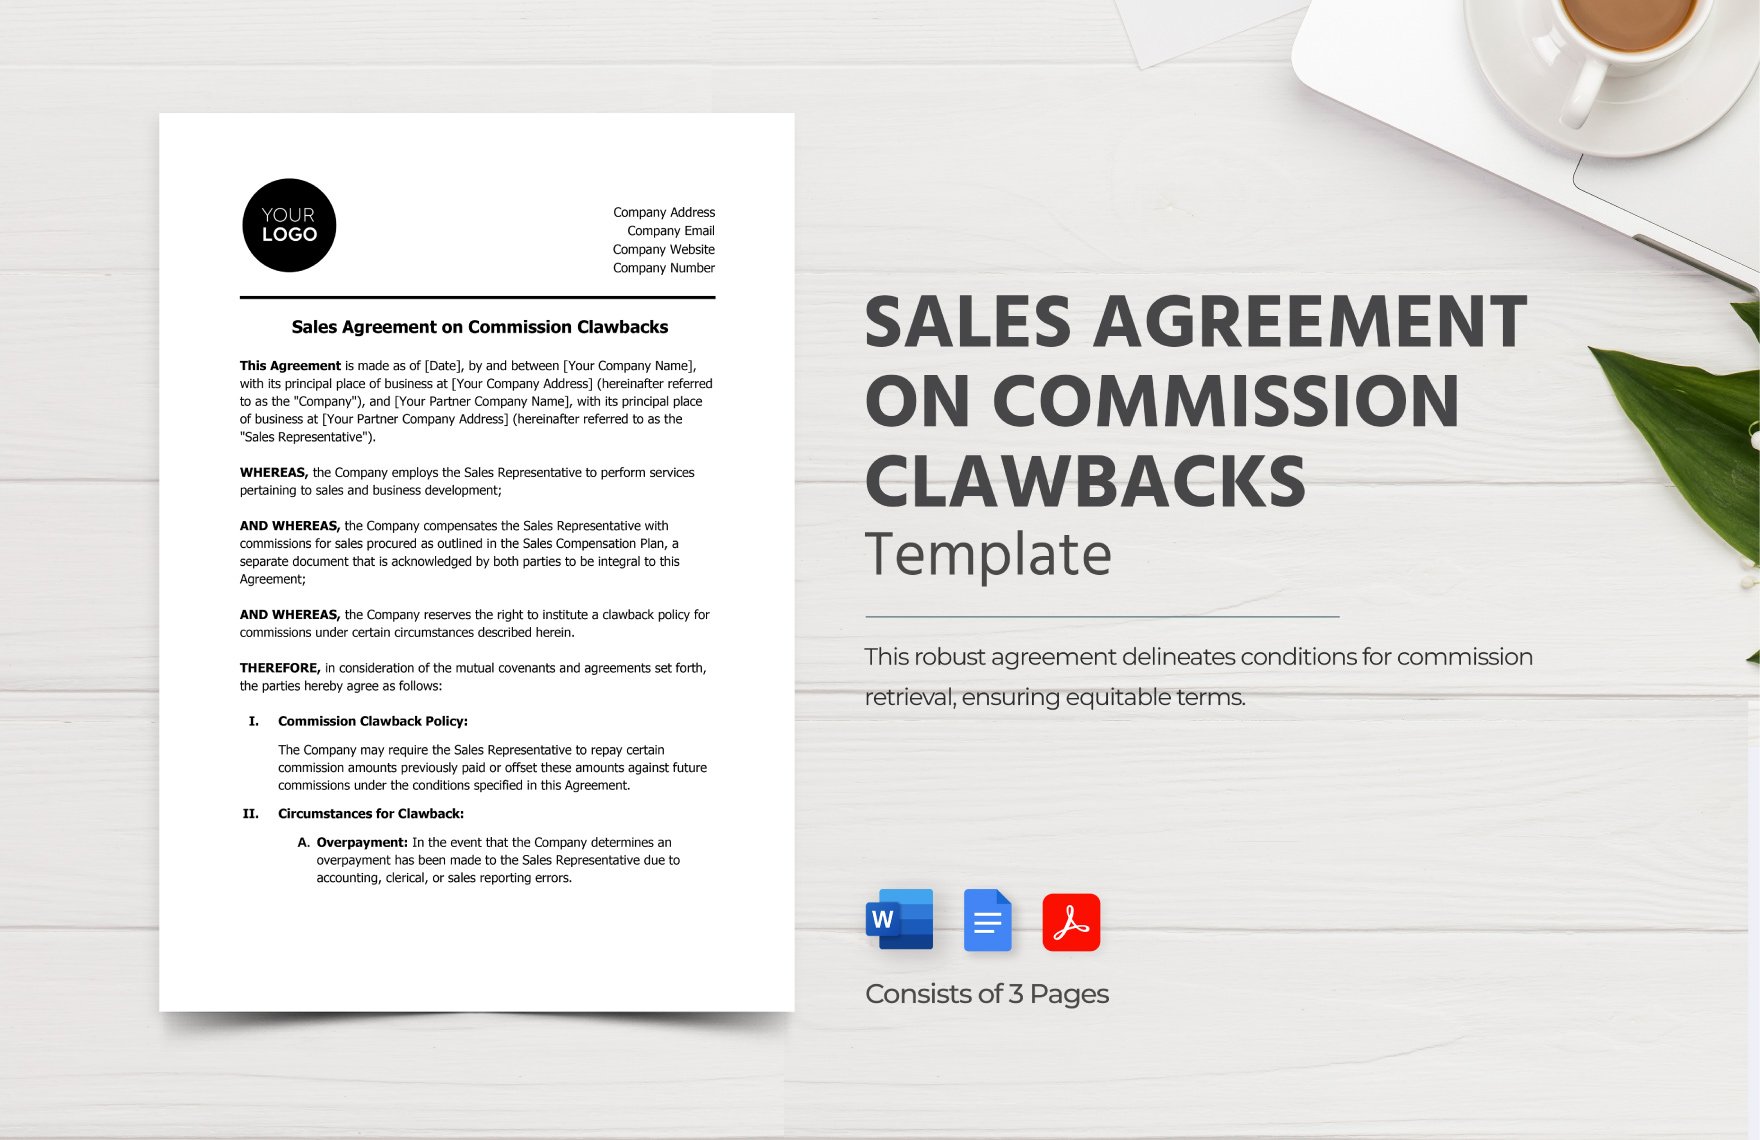 Sales Agreement on Commission Clawbacks Template